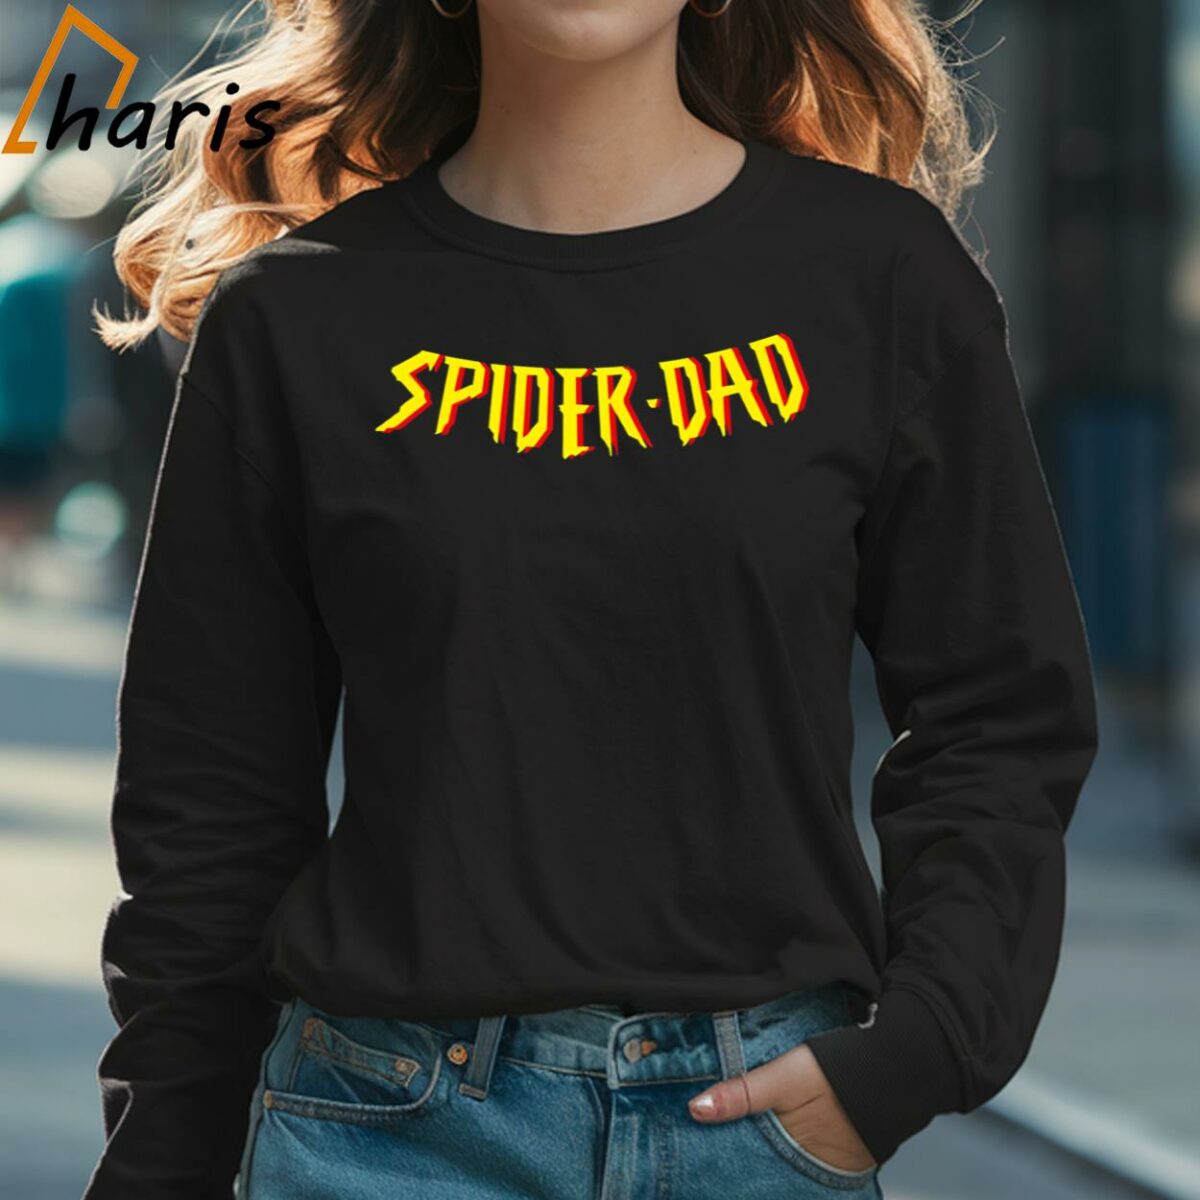 Spider Dad T shirt Happy Fathers Day 3 Long sleeve shirt